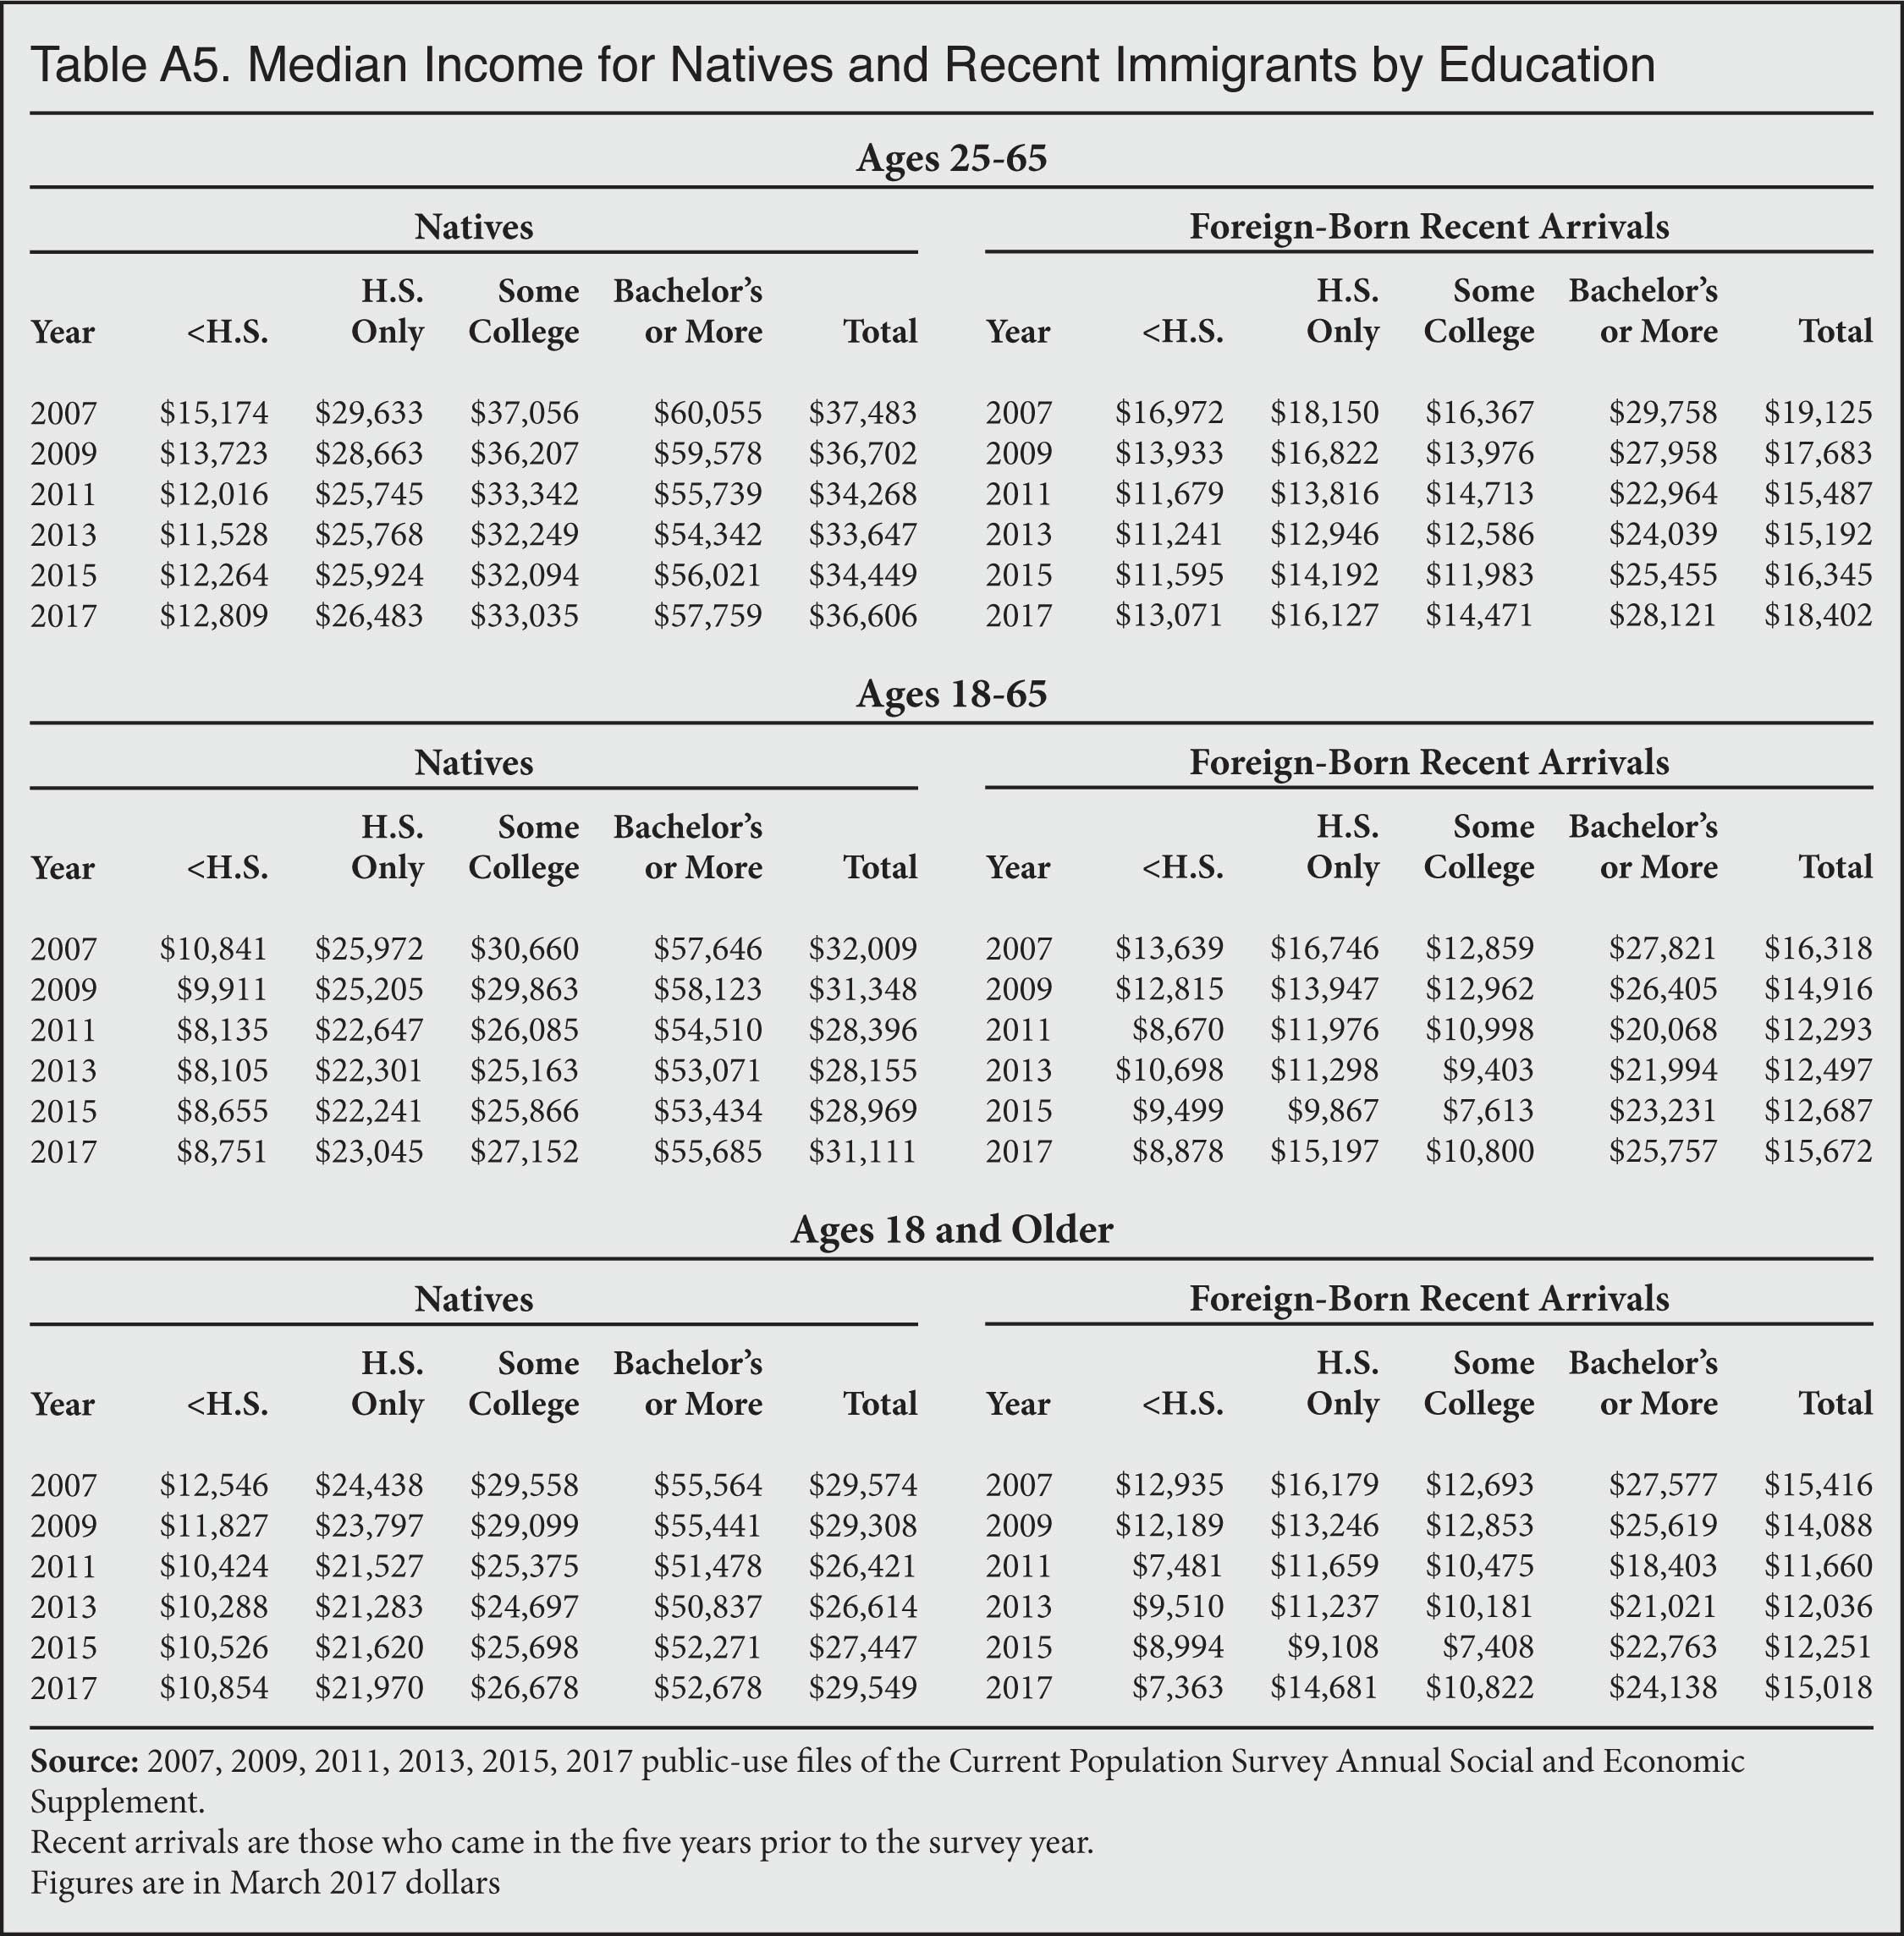 Table: Median Income for Natives and Recent Immigrants by Education, 2007-2017